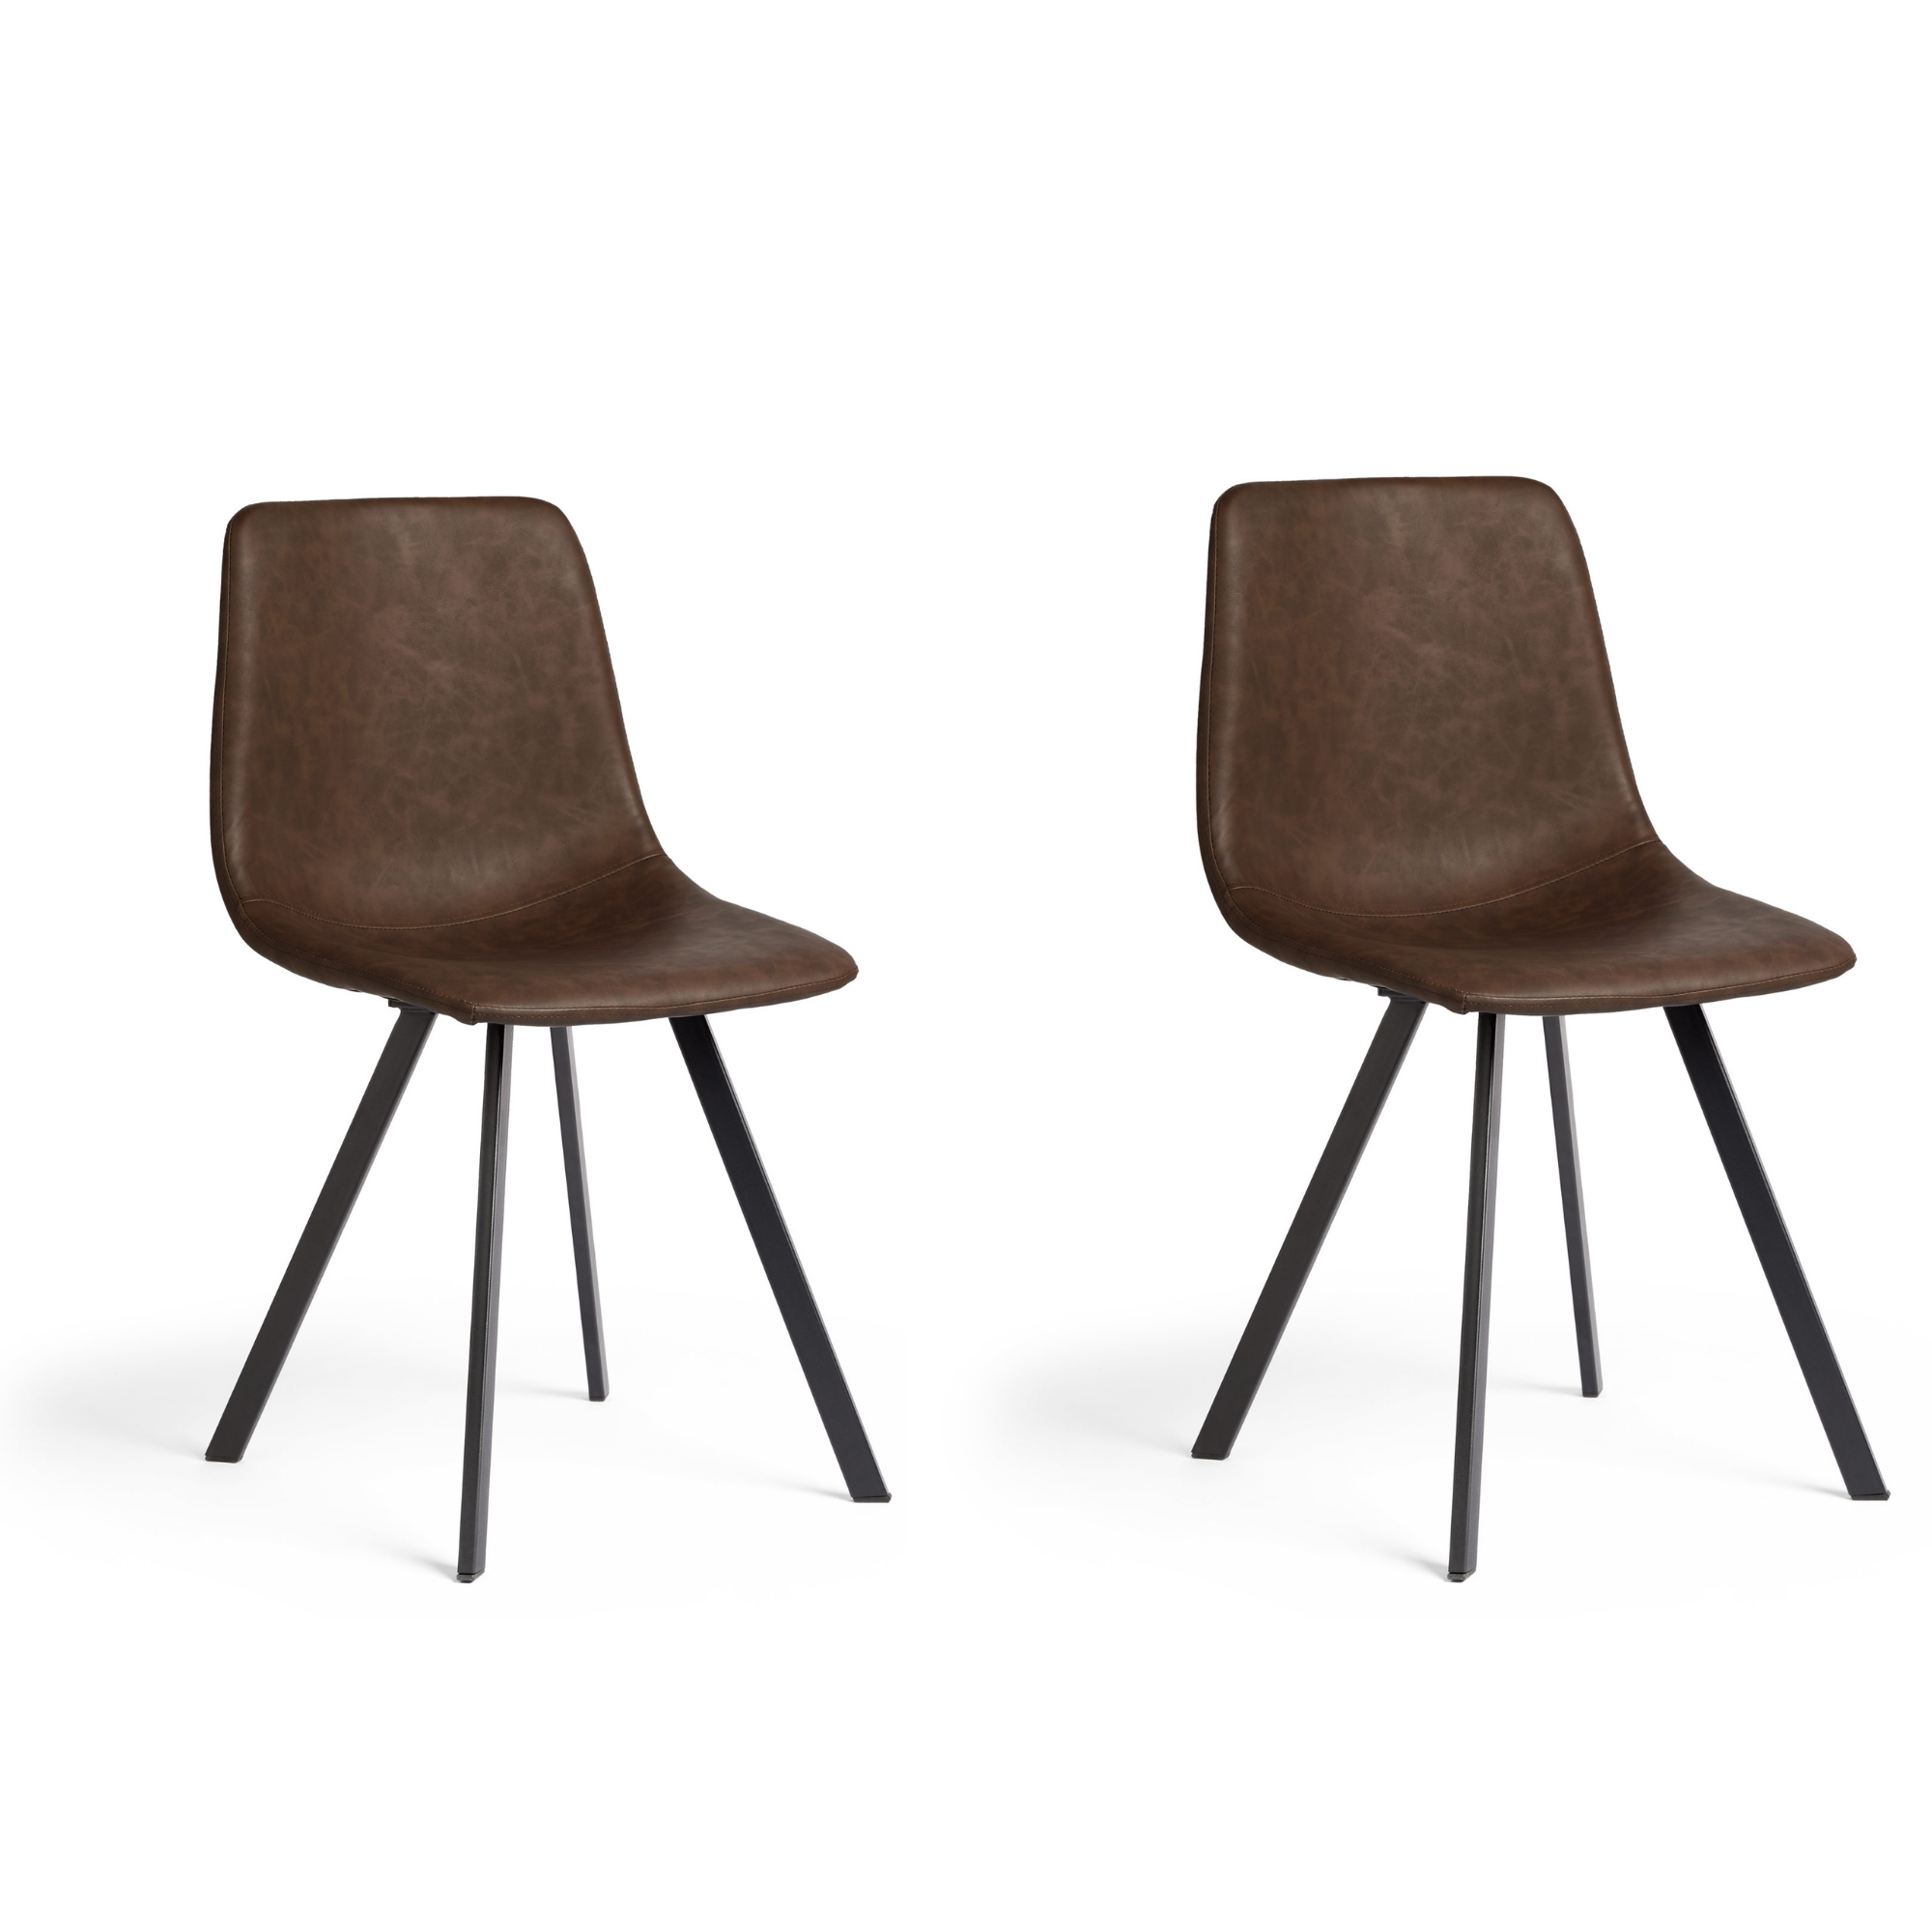 Spinningfield Faux Leather Dining Chairs - 2 Dark Brown Chairs, Black Metal Legs